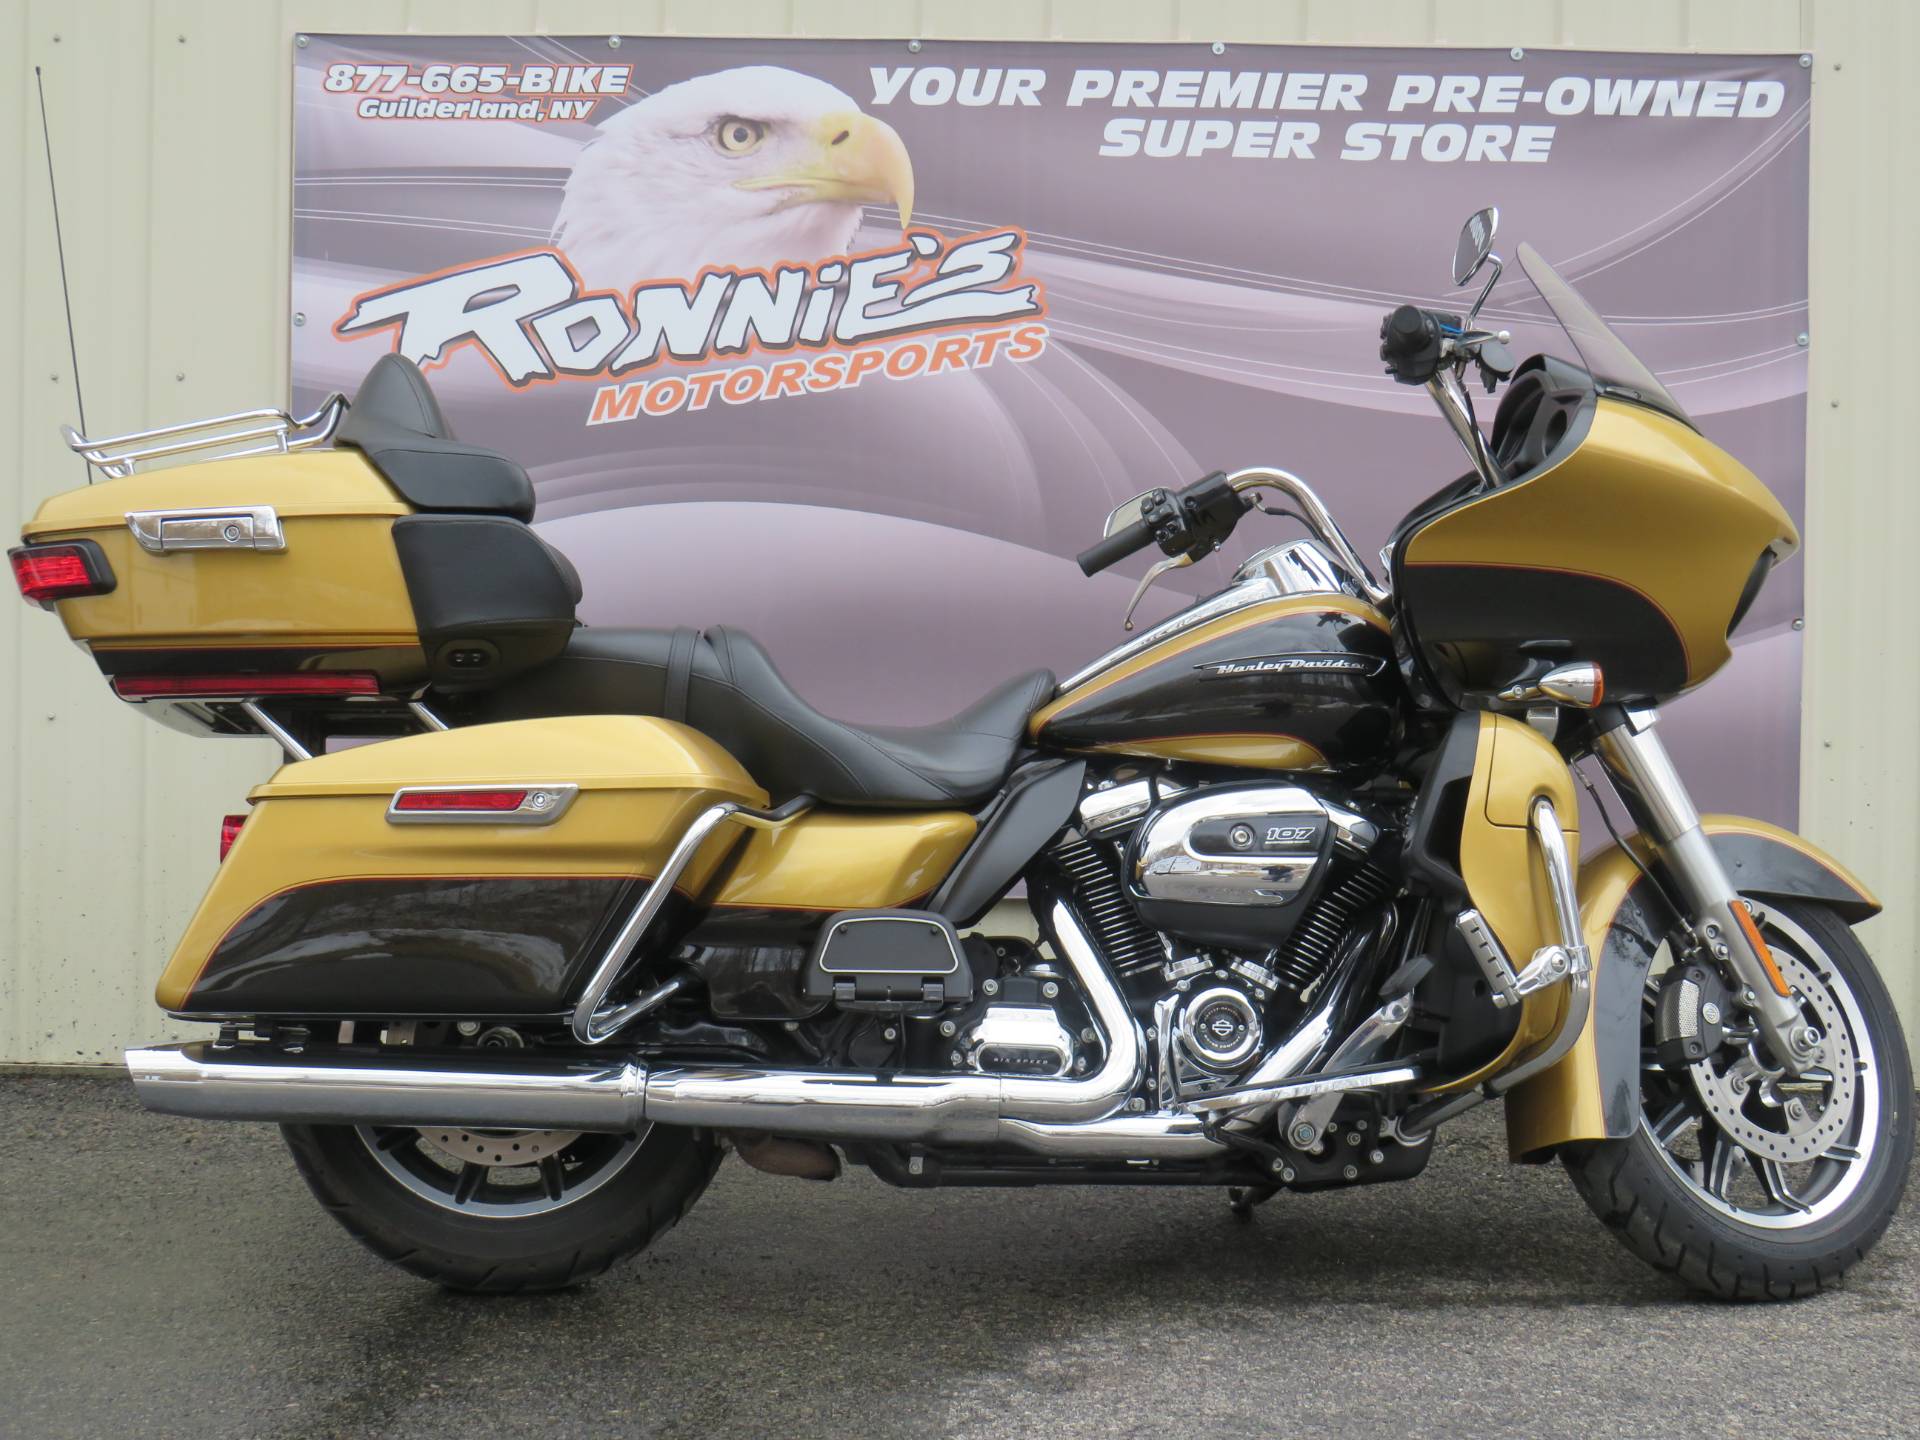 Used 2017 Harley Davidson Road Glide Ultra Motorcycles In Guilderland Ny Stock Number 617248 Ronniesmotorsports Com